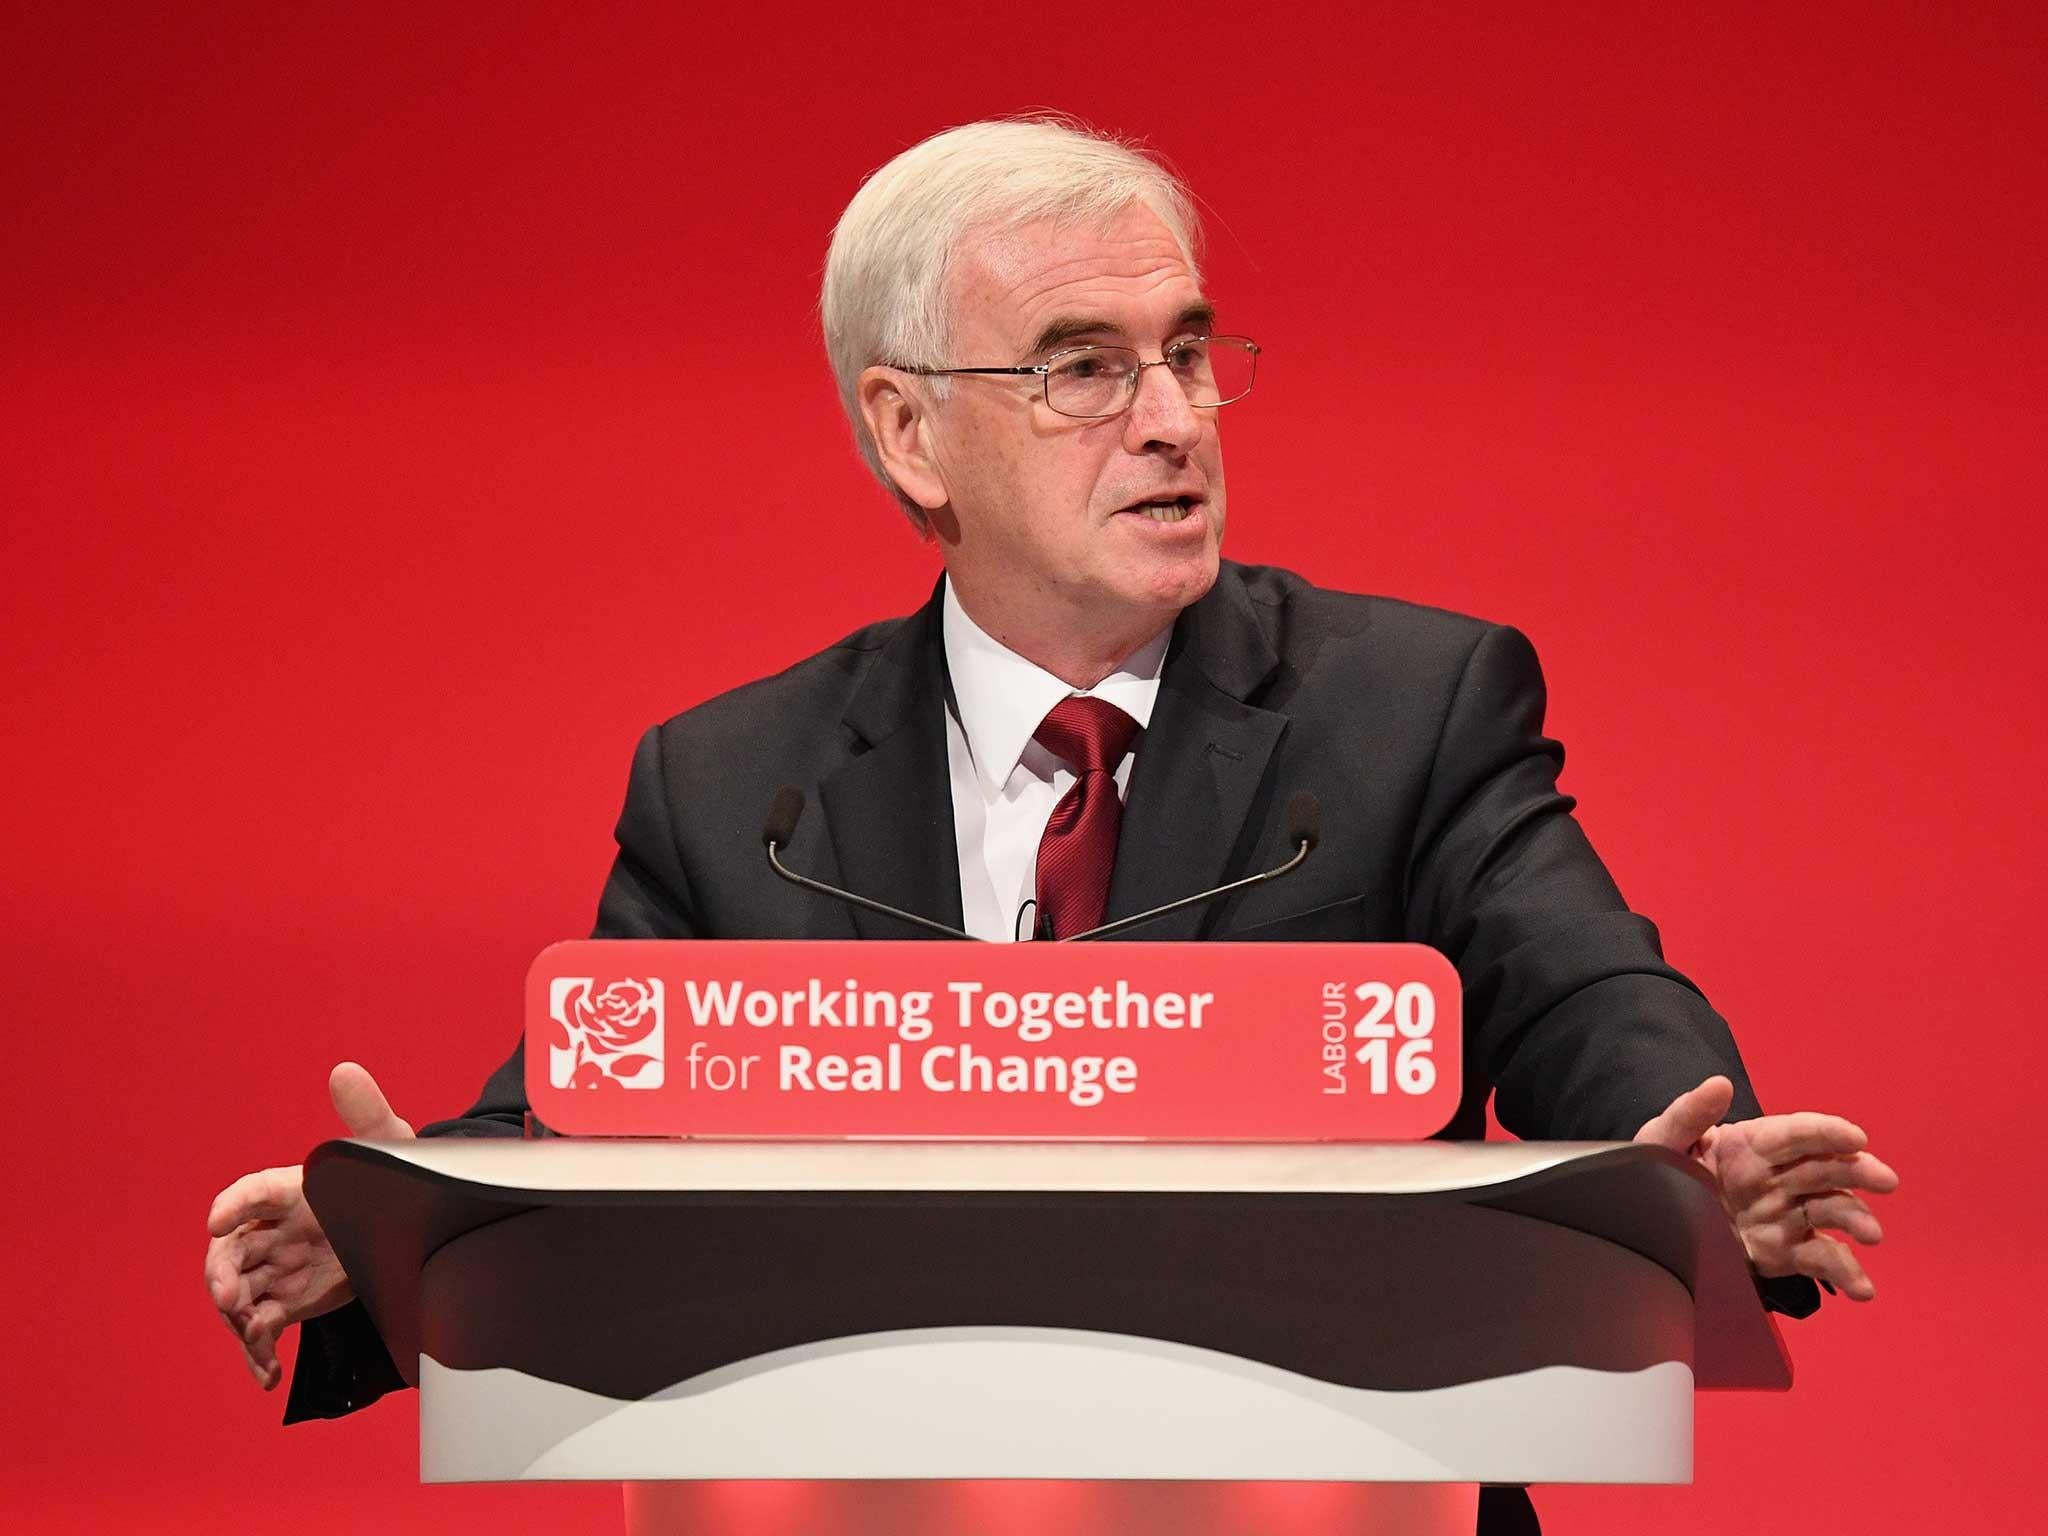 Shadow Chancellor John McDonnell has been criticised for appearing to show support for a hard Brexit